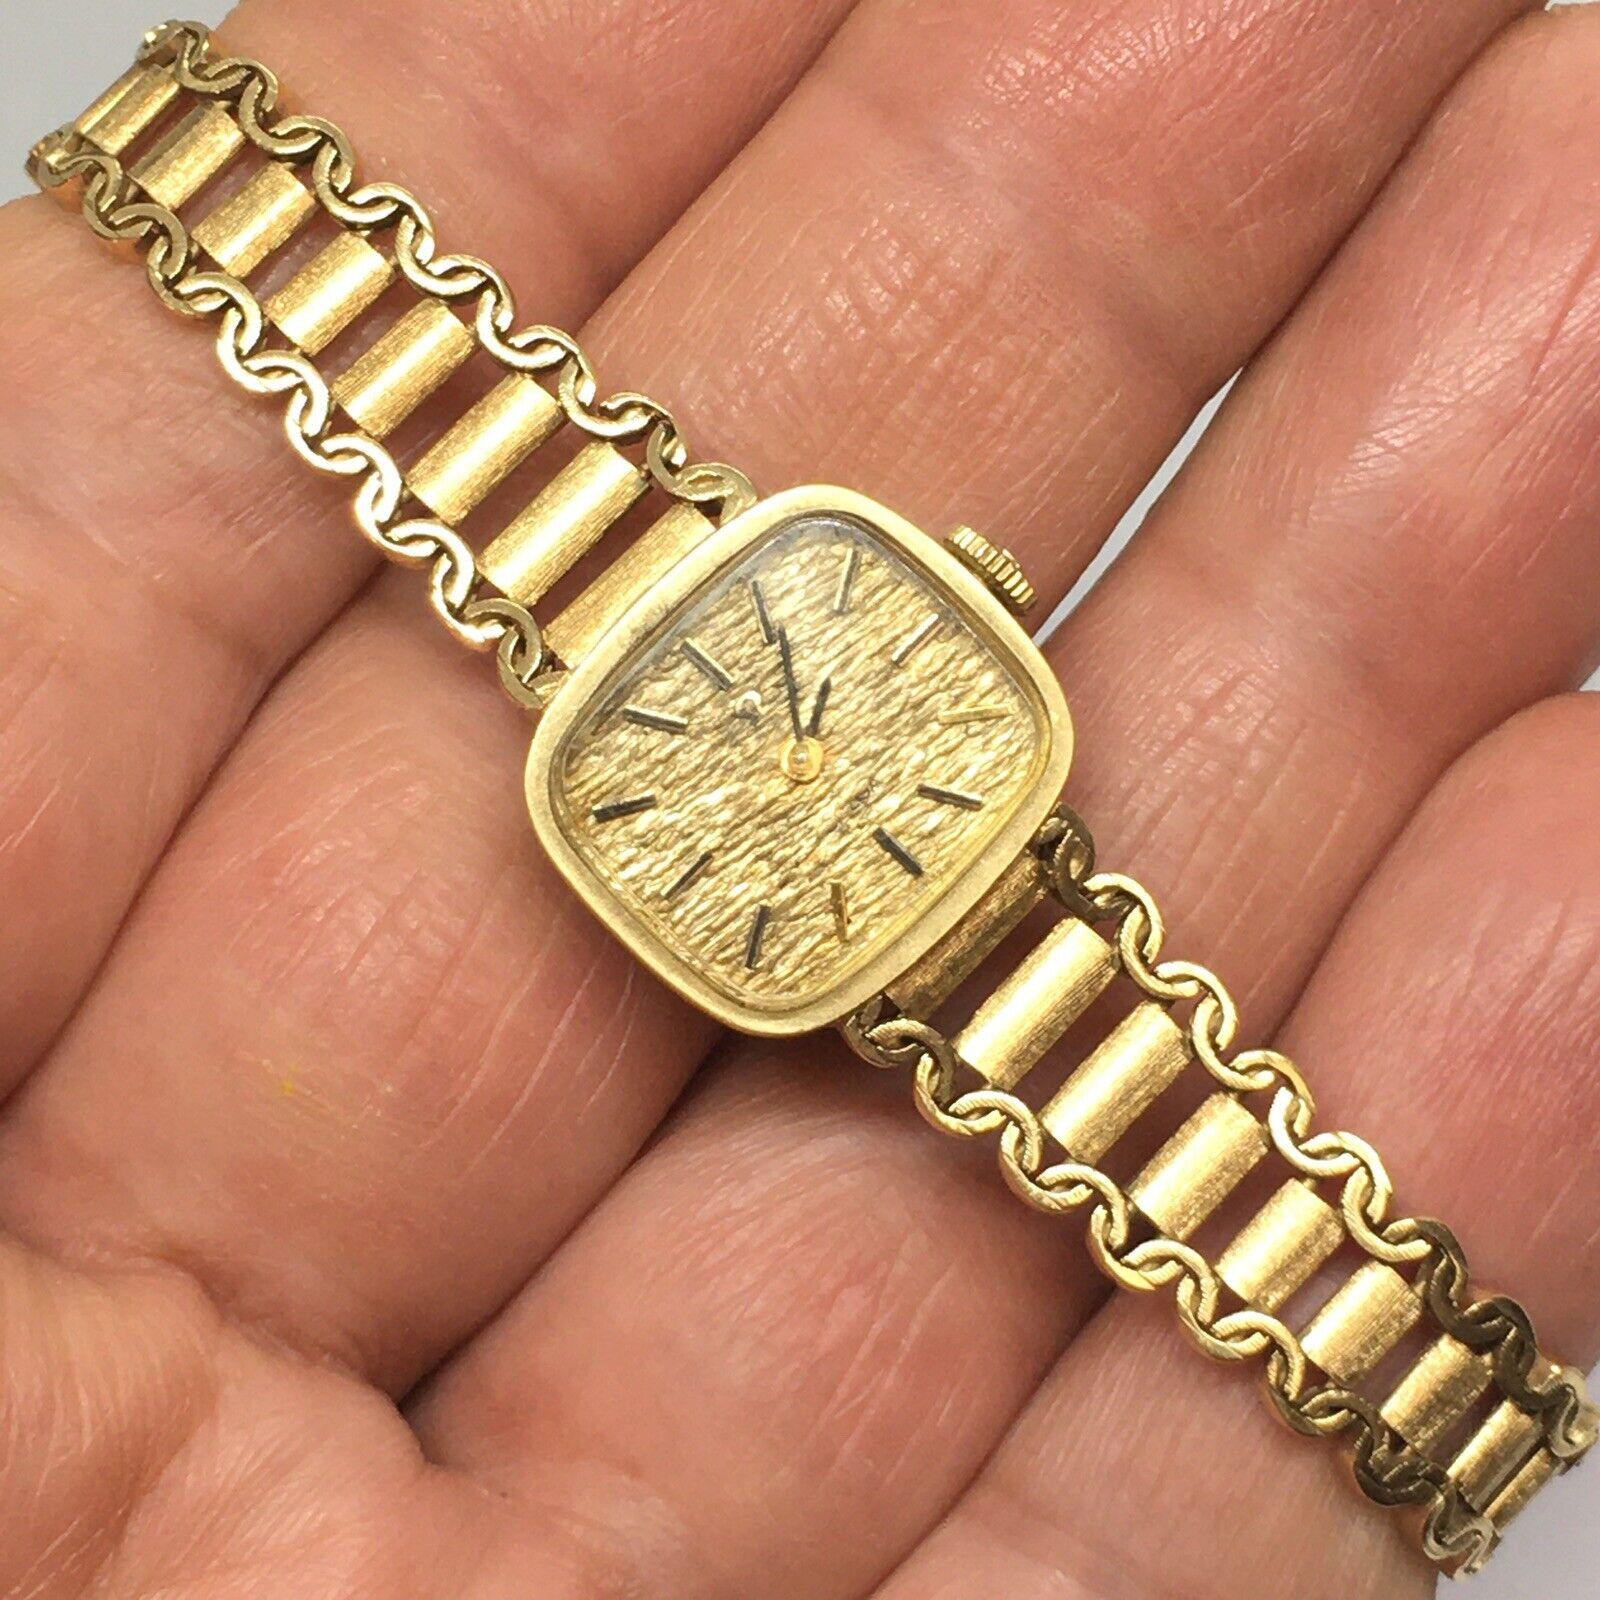 Lady's Omega 14K Yellow Solid Gold Mechanical Watch Factory Marked Case 8 inch In Good Condition For Sale In Santa Monica, CA